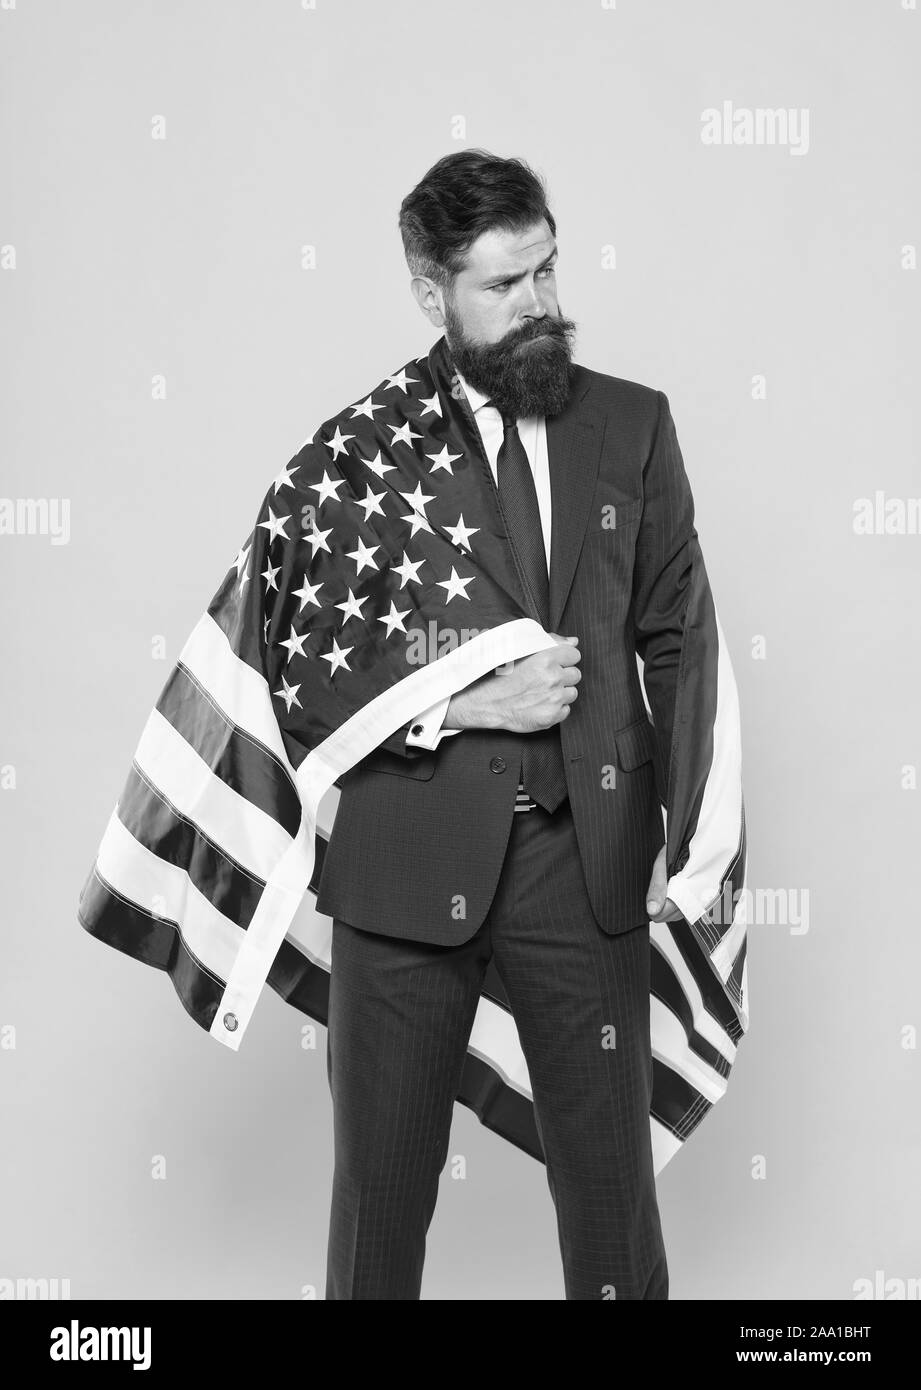 Businessman bearded man in formal suit hold flag USA. Businessman concept. Successful businessman lawyer or politician. Business people. Independence means decide according to law and facts. Stock Photo